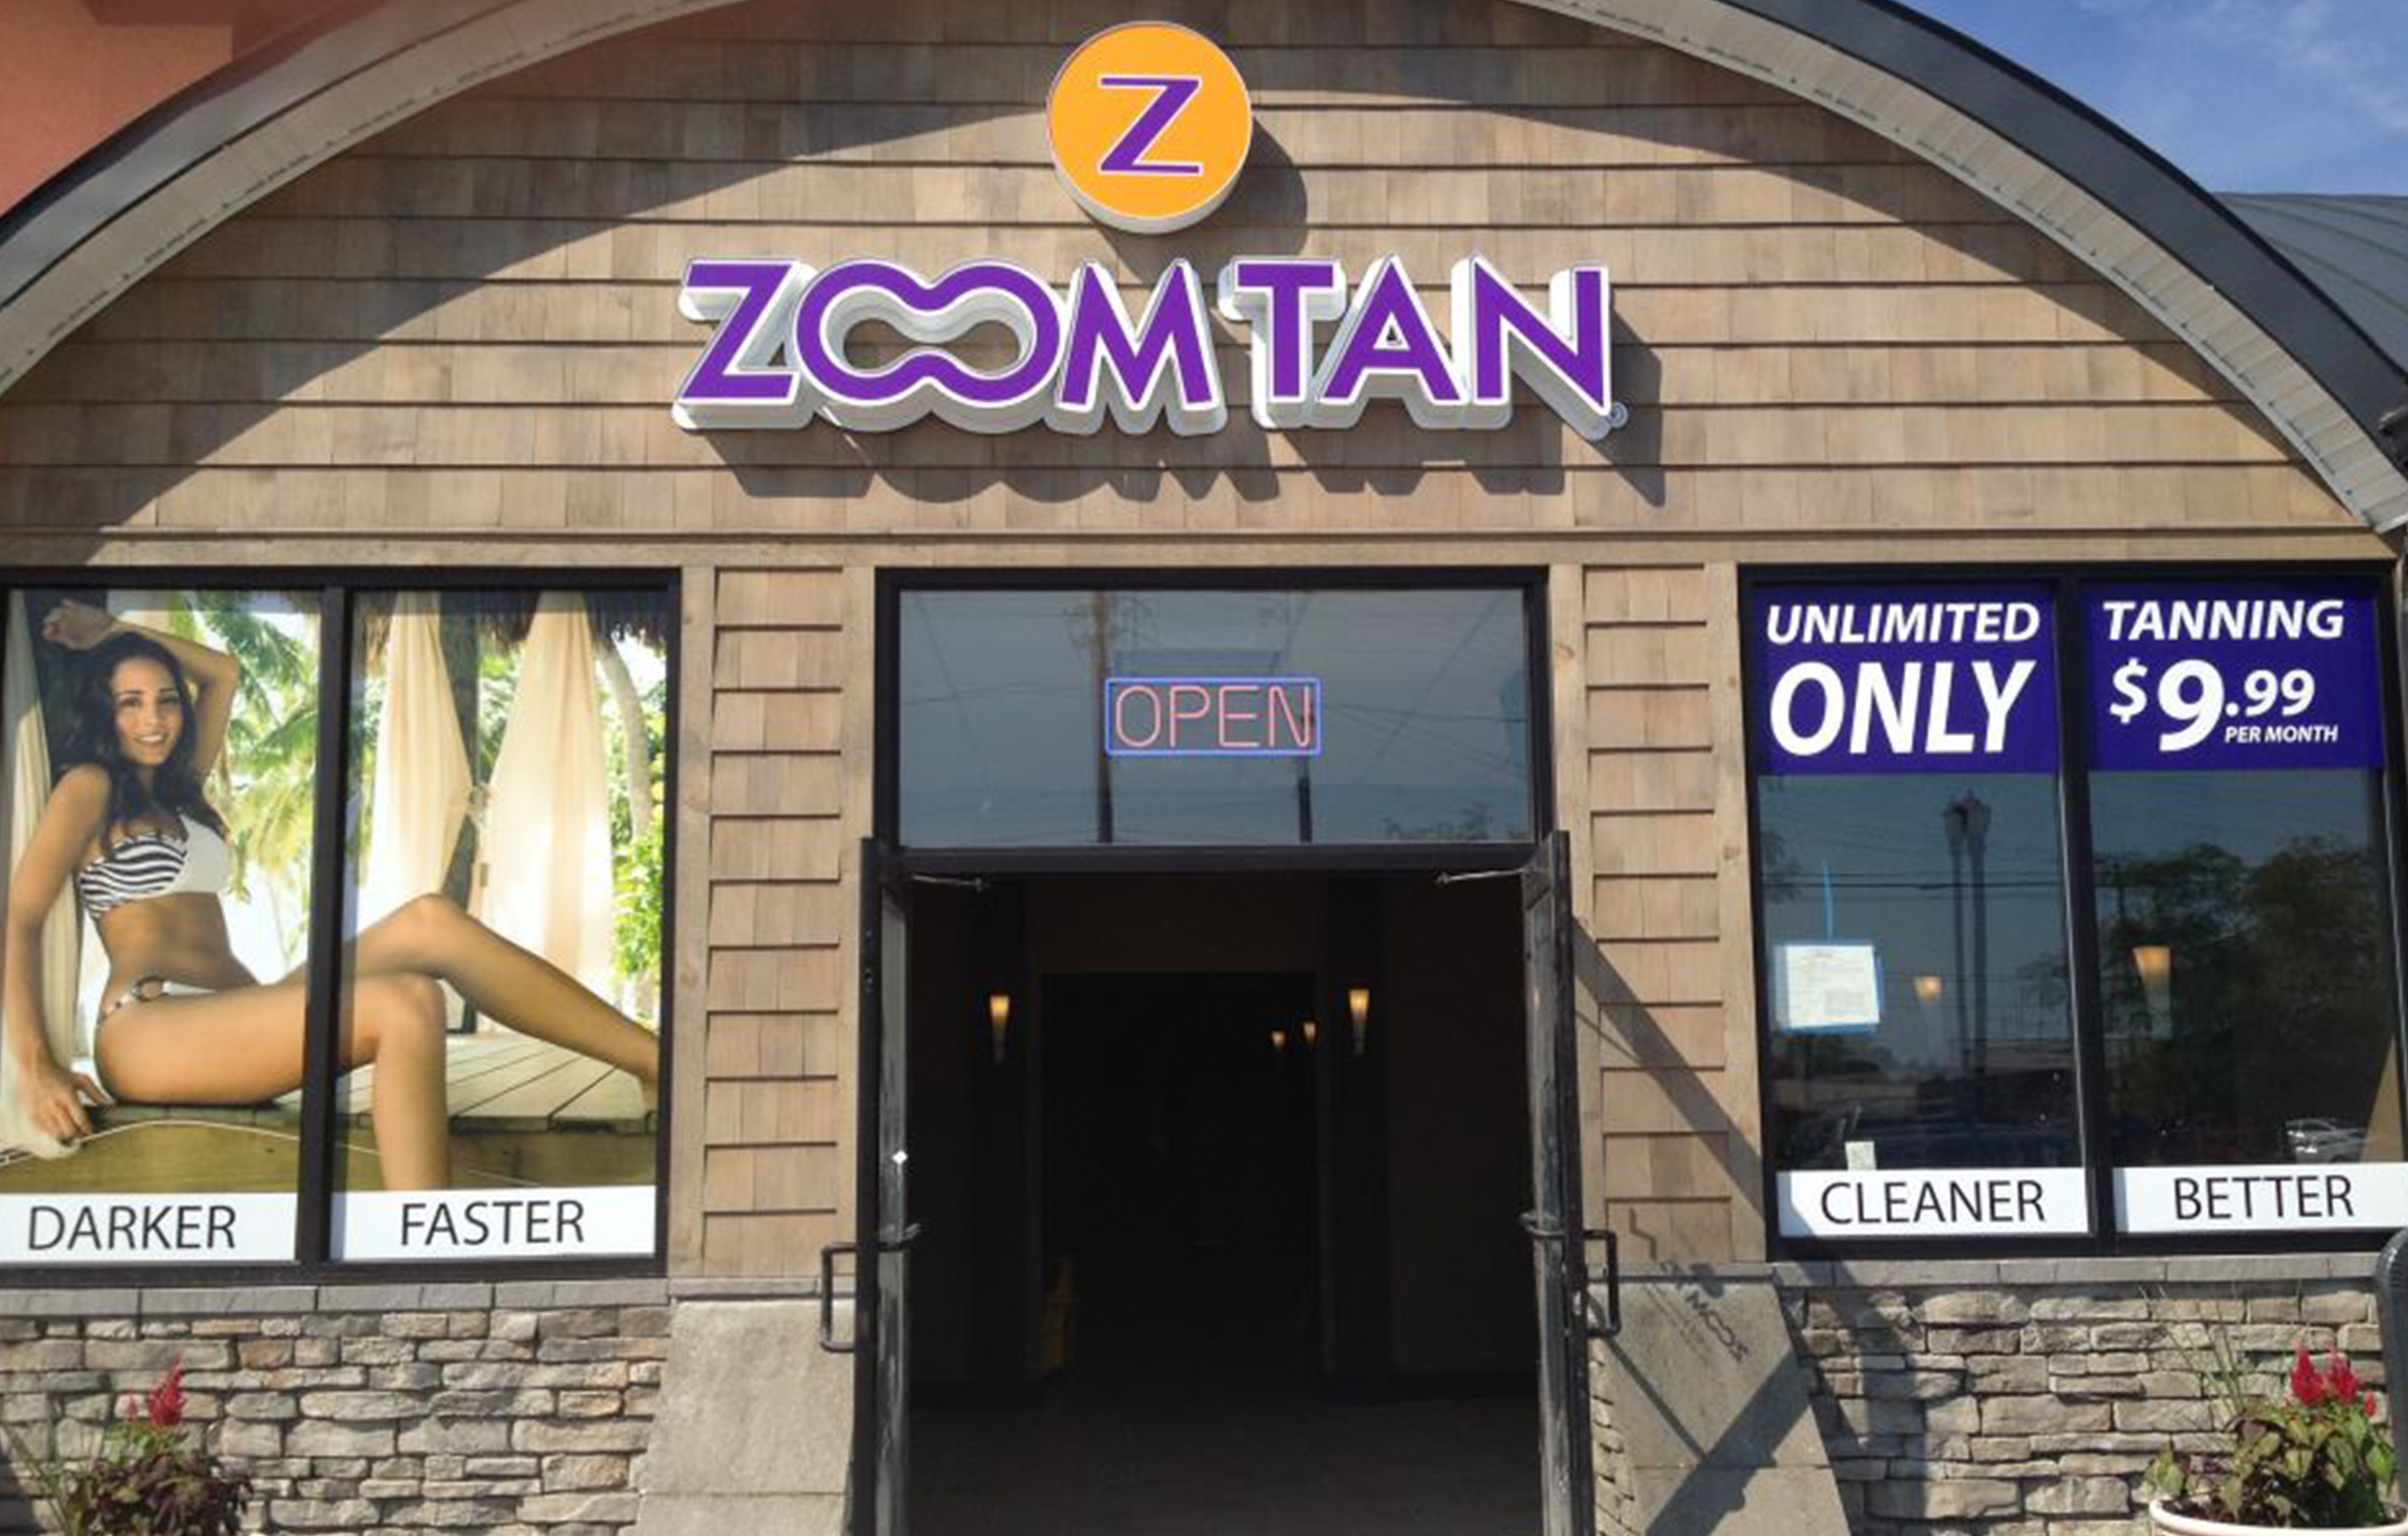 Zoom Tan - Building Letters, Illuminated Signage